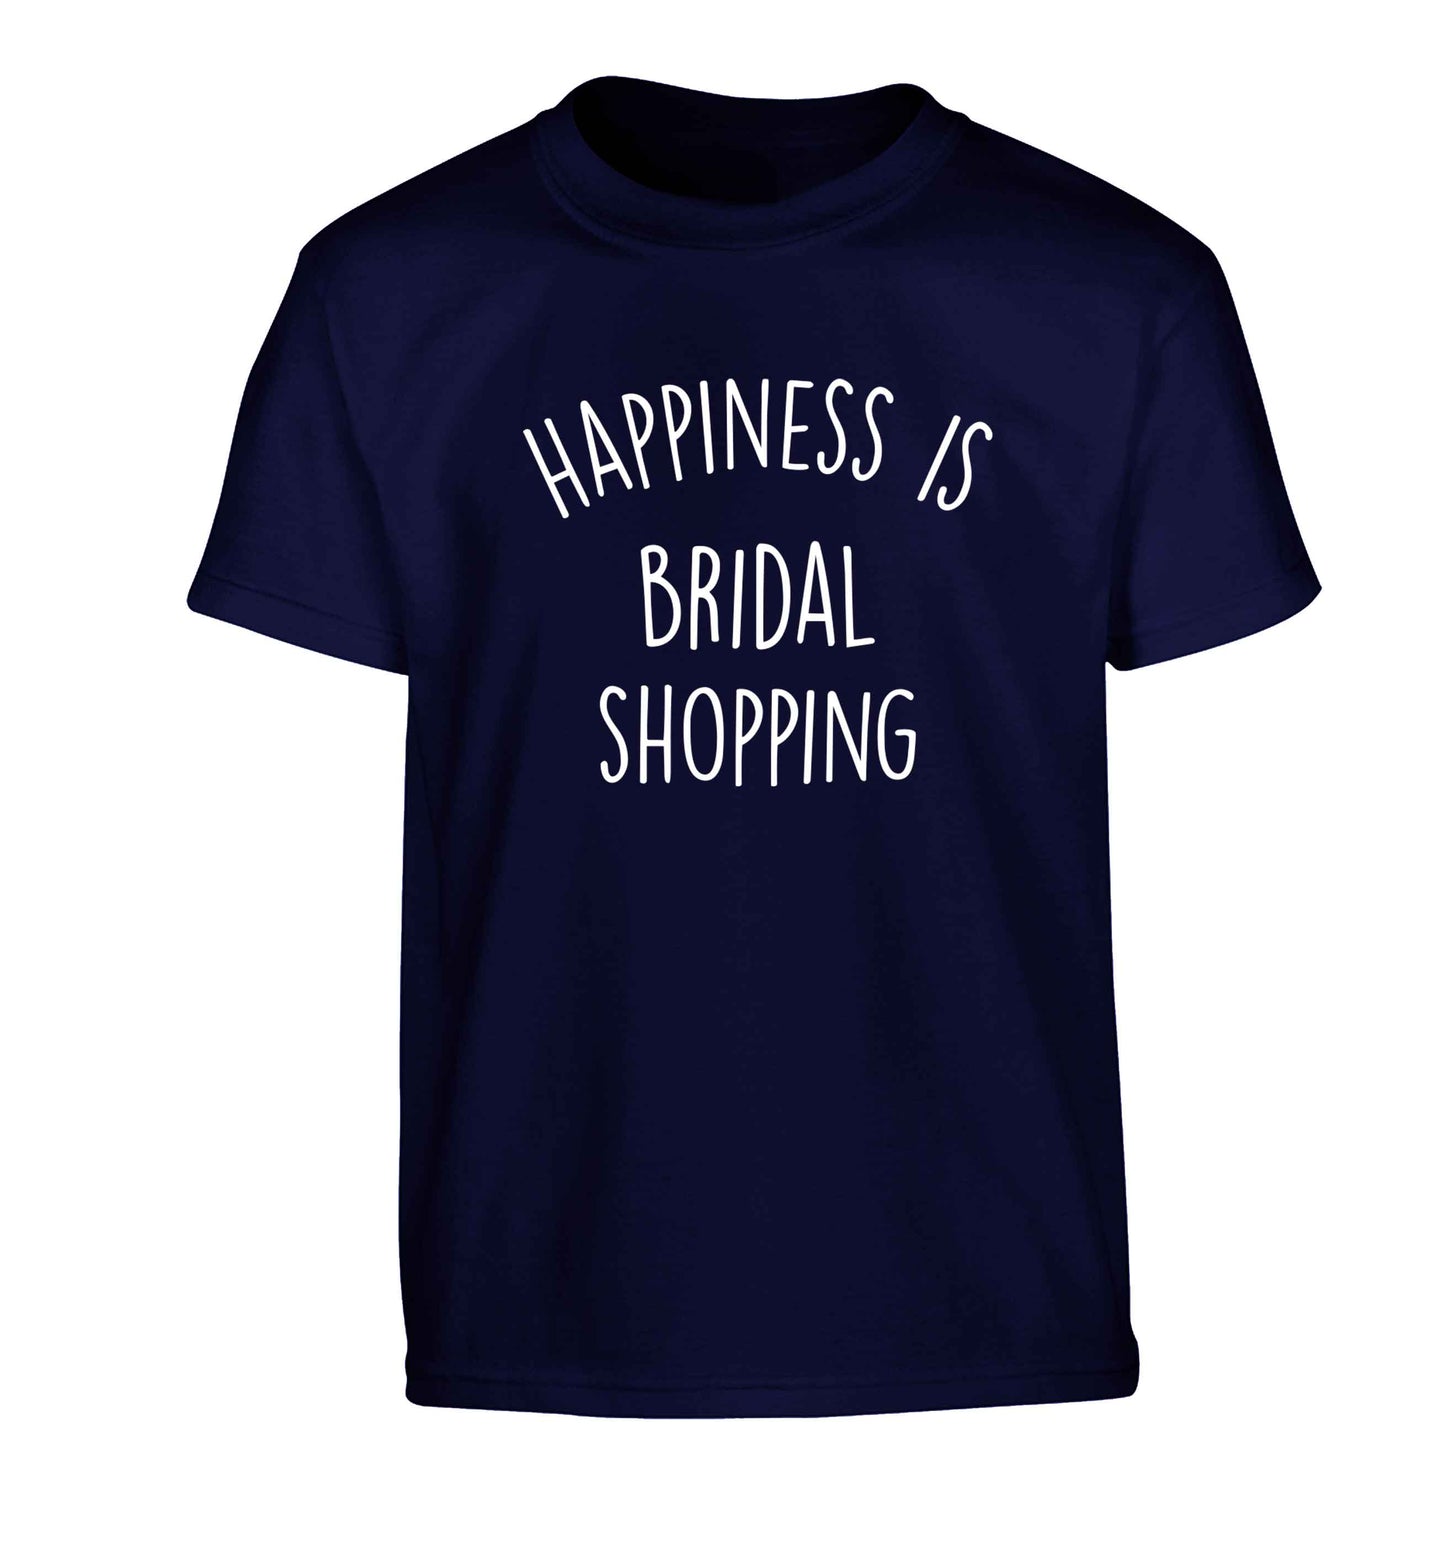 Happiness is bridal shopping Children's navy Tshirt 12-13 Years